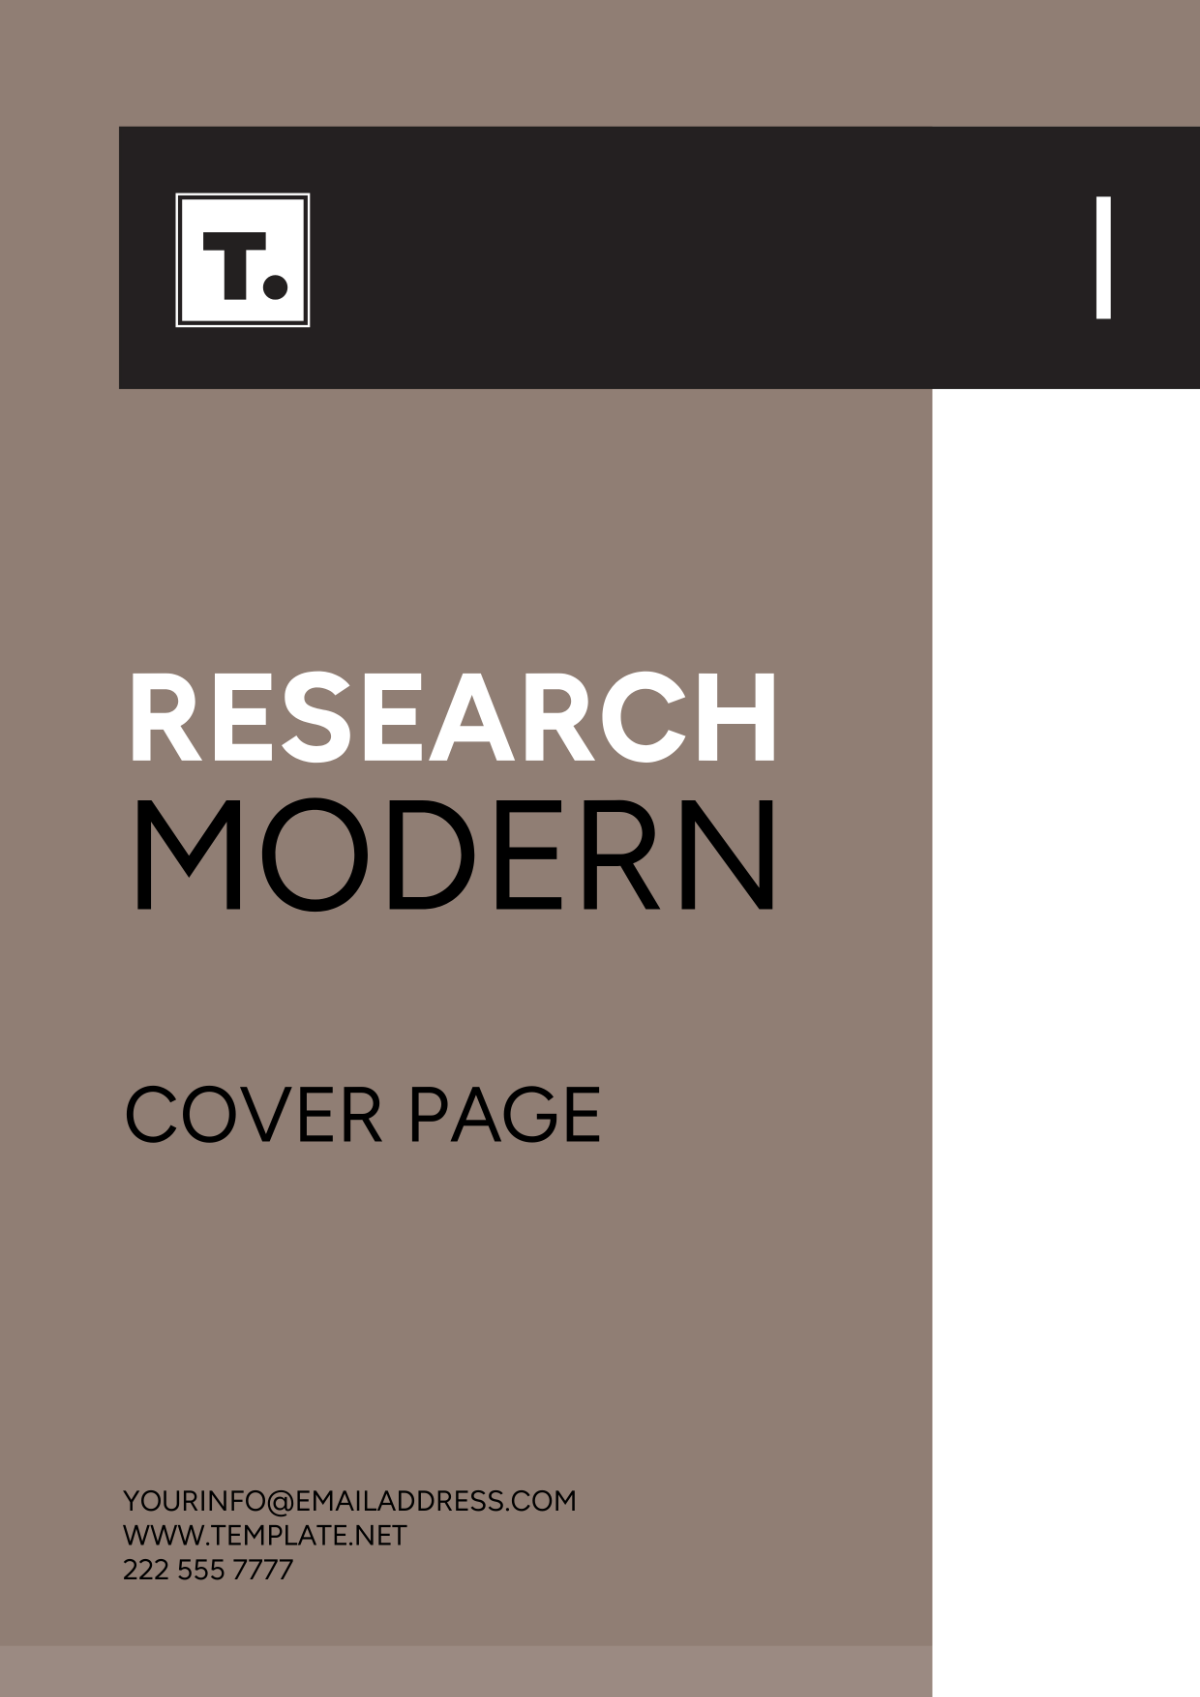 Research Modern Cover Page Template